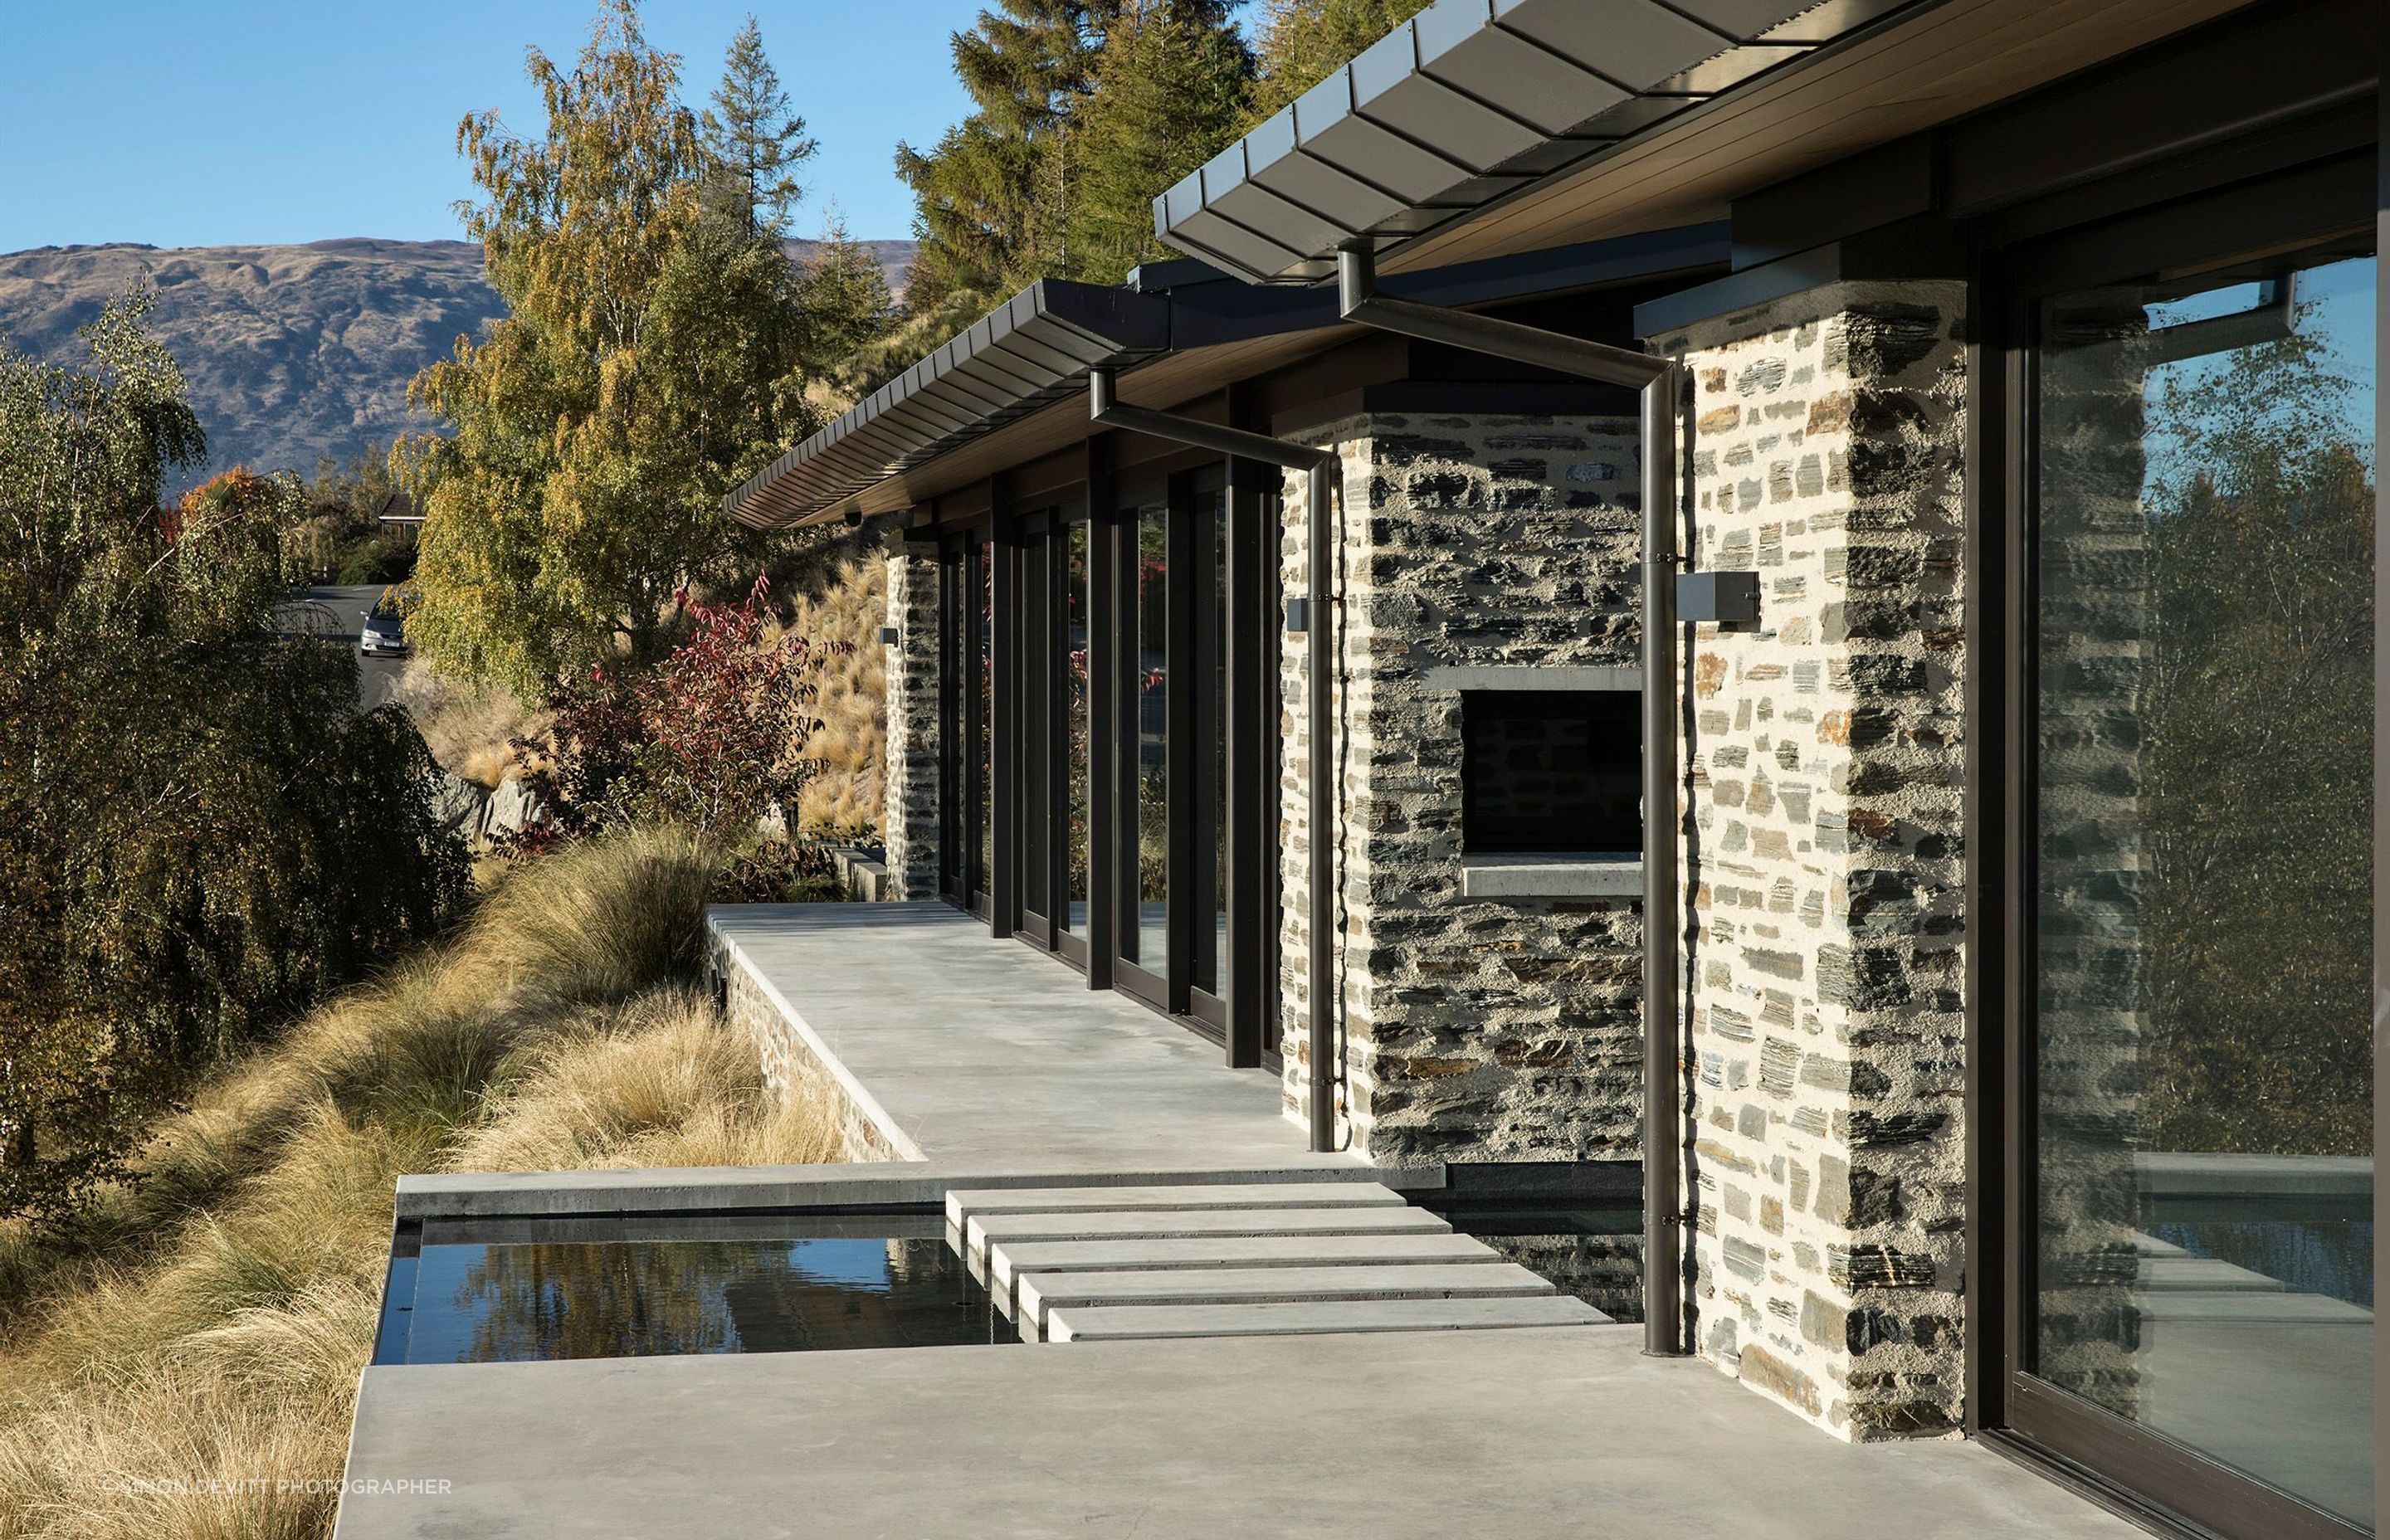 Constructed in local schist, Mt Aspiring House, by Mason &amp; Wales Architects, pays homage to the jaw-dropping views of Lake Wanaka and The Remarkables through full-height glazing and this linking pond between forms. Photograph by Simon Devitt.